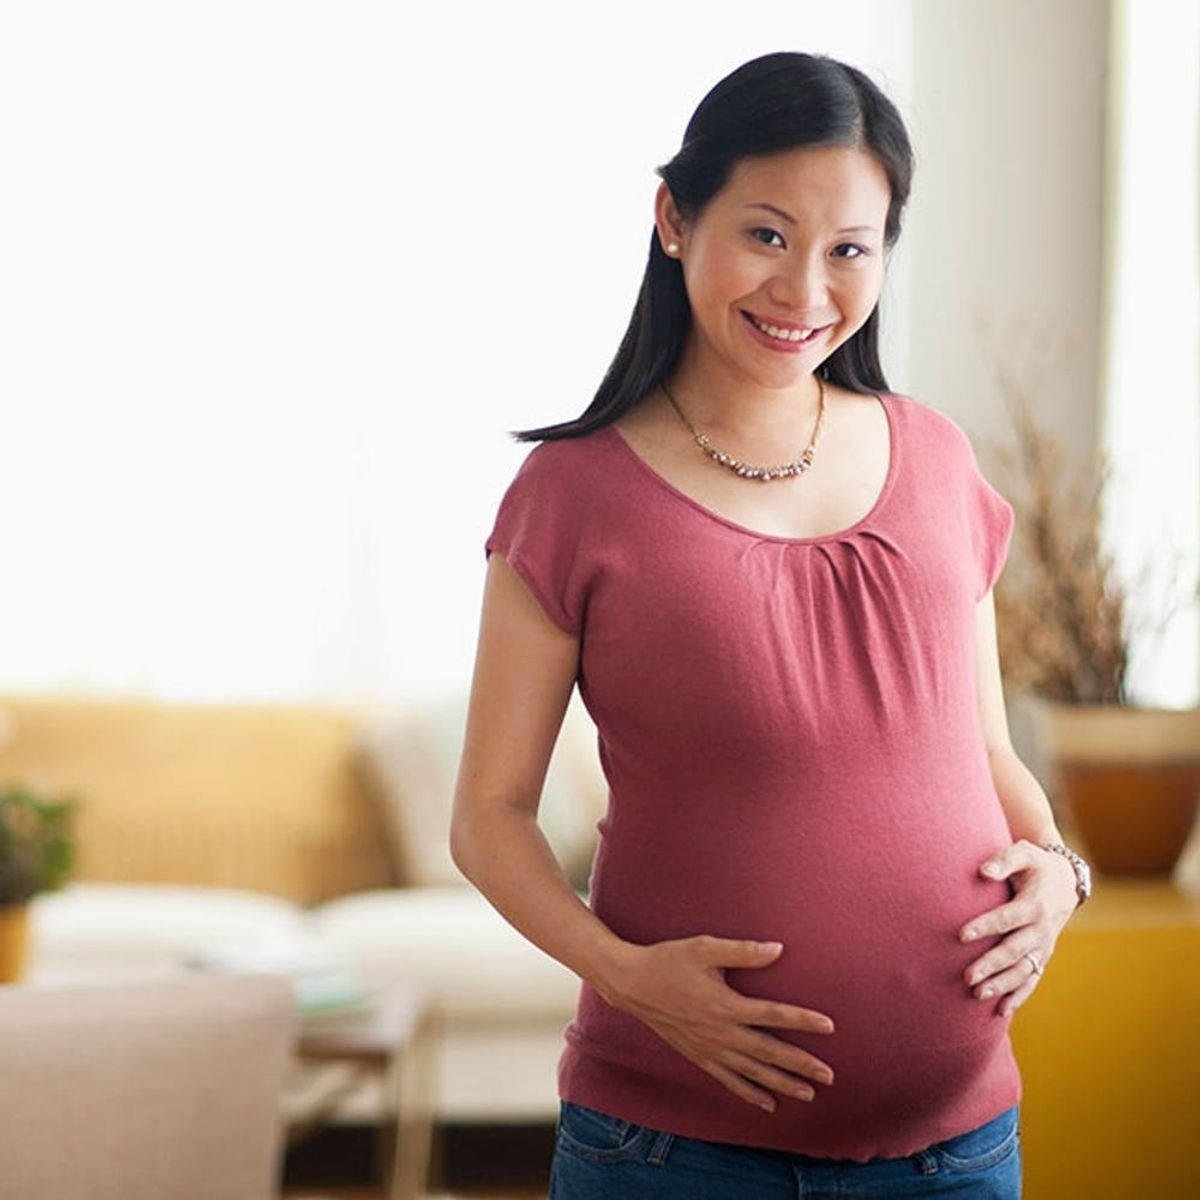 Your Essential Pregnancy To-Do List by Trimester